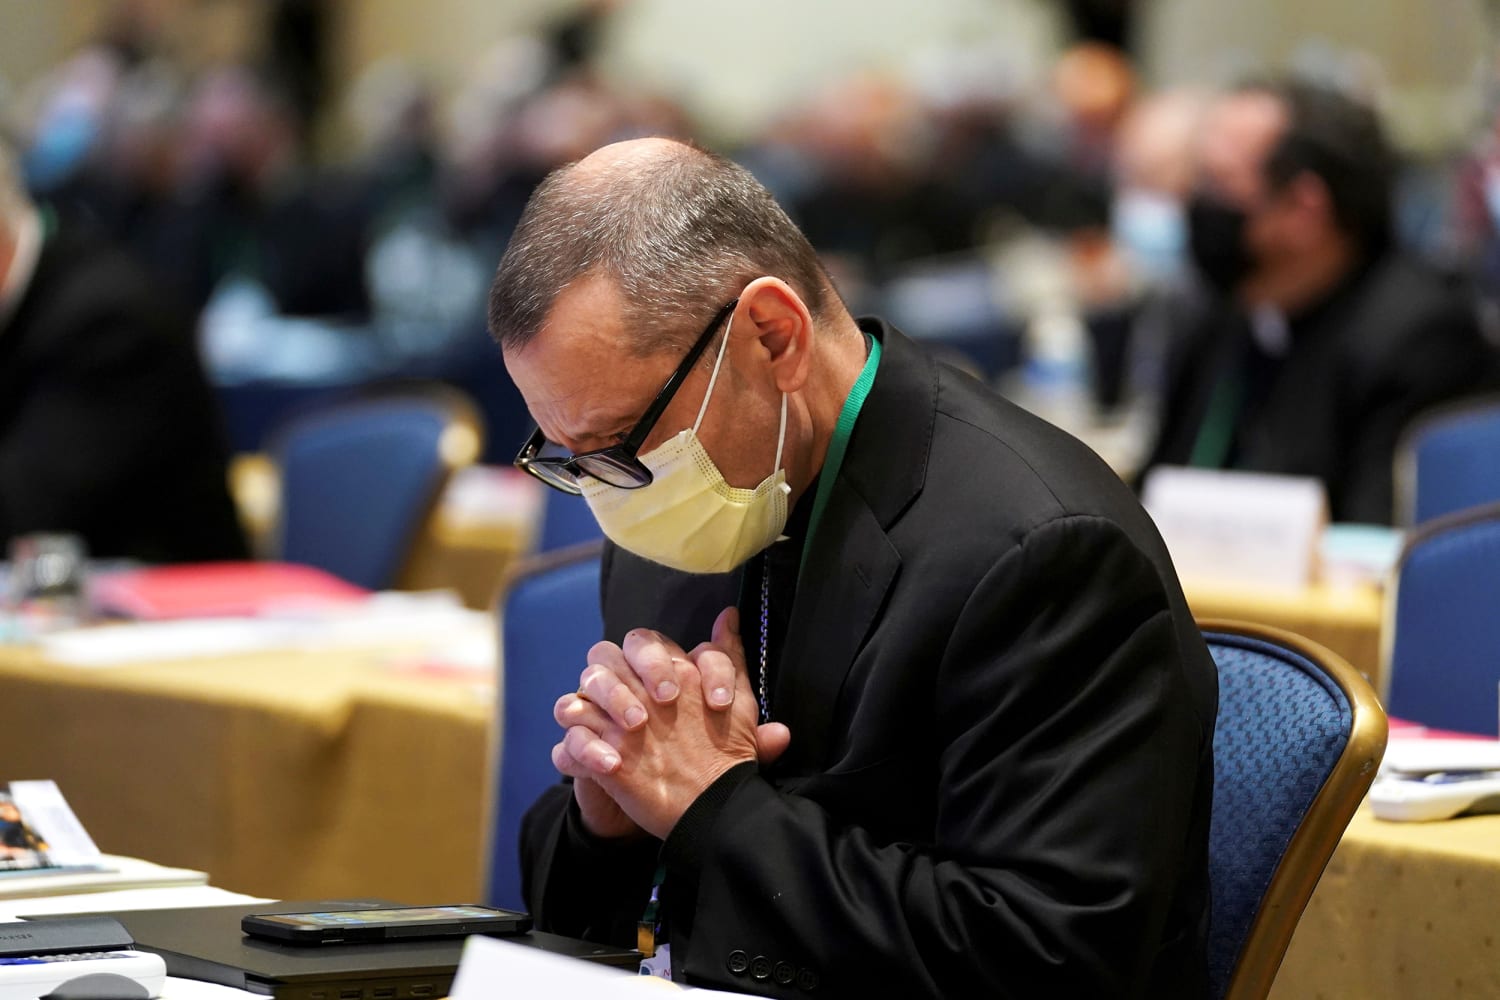 Some U.S. bishops are so obsessed with abortion they’re letting parishioners die of Covid